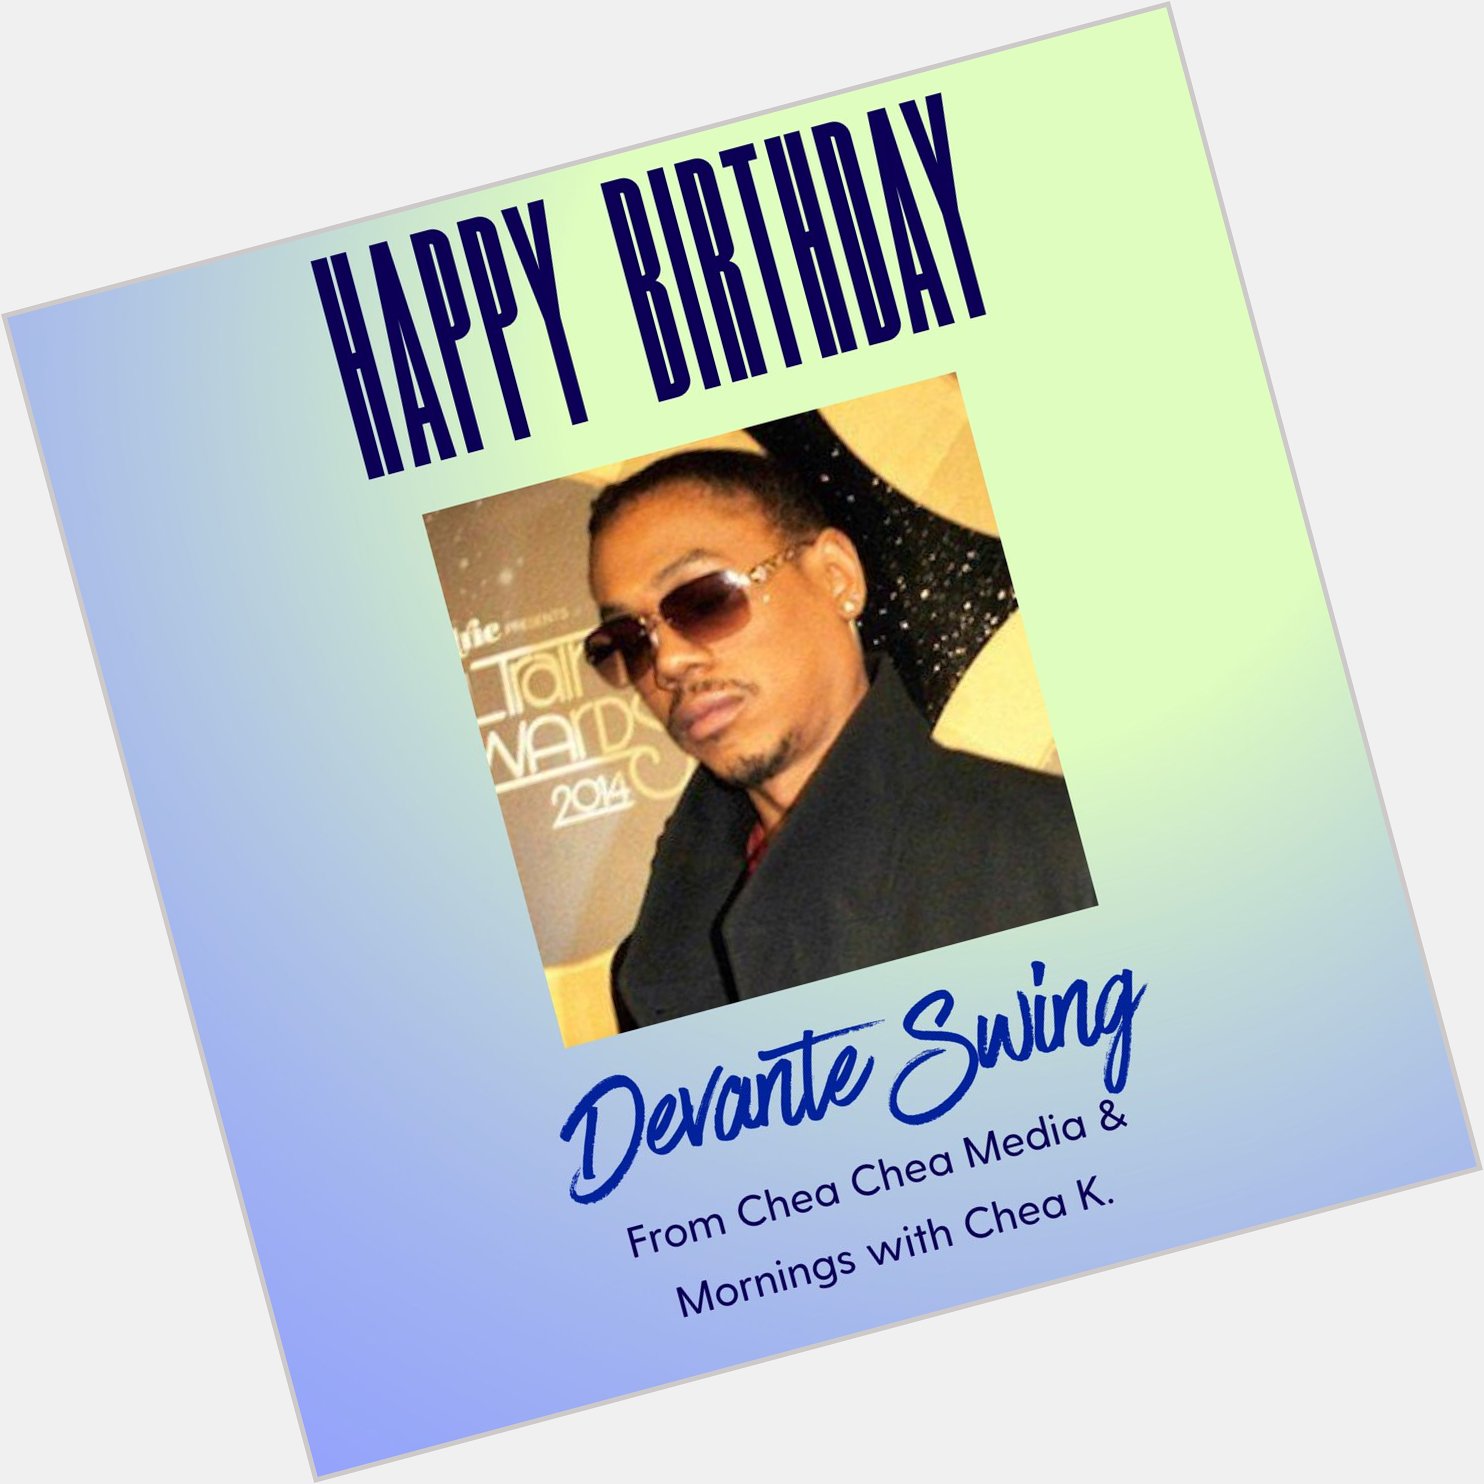 Devante Swing have a blessed and happy birthday!
Chea Chea Media   